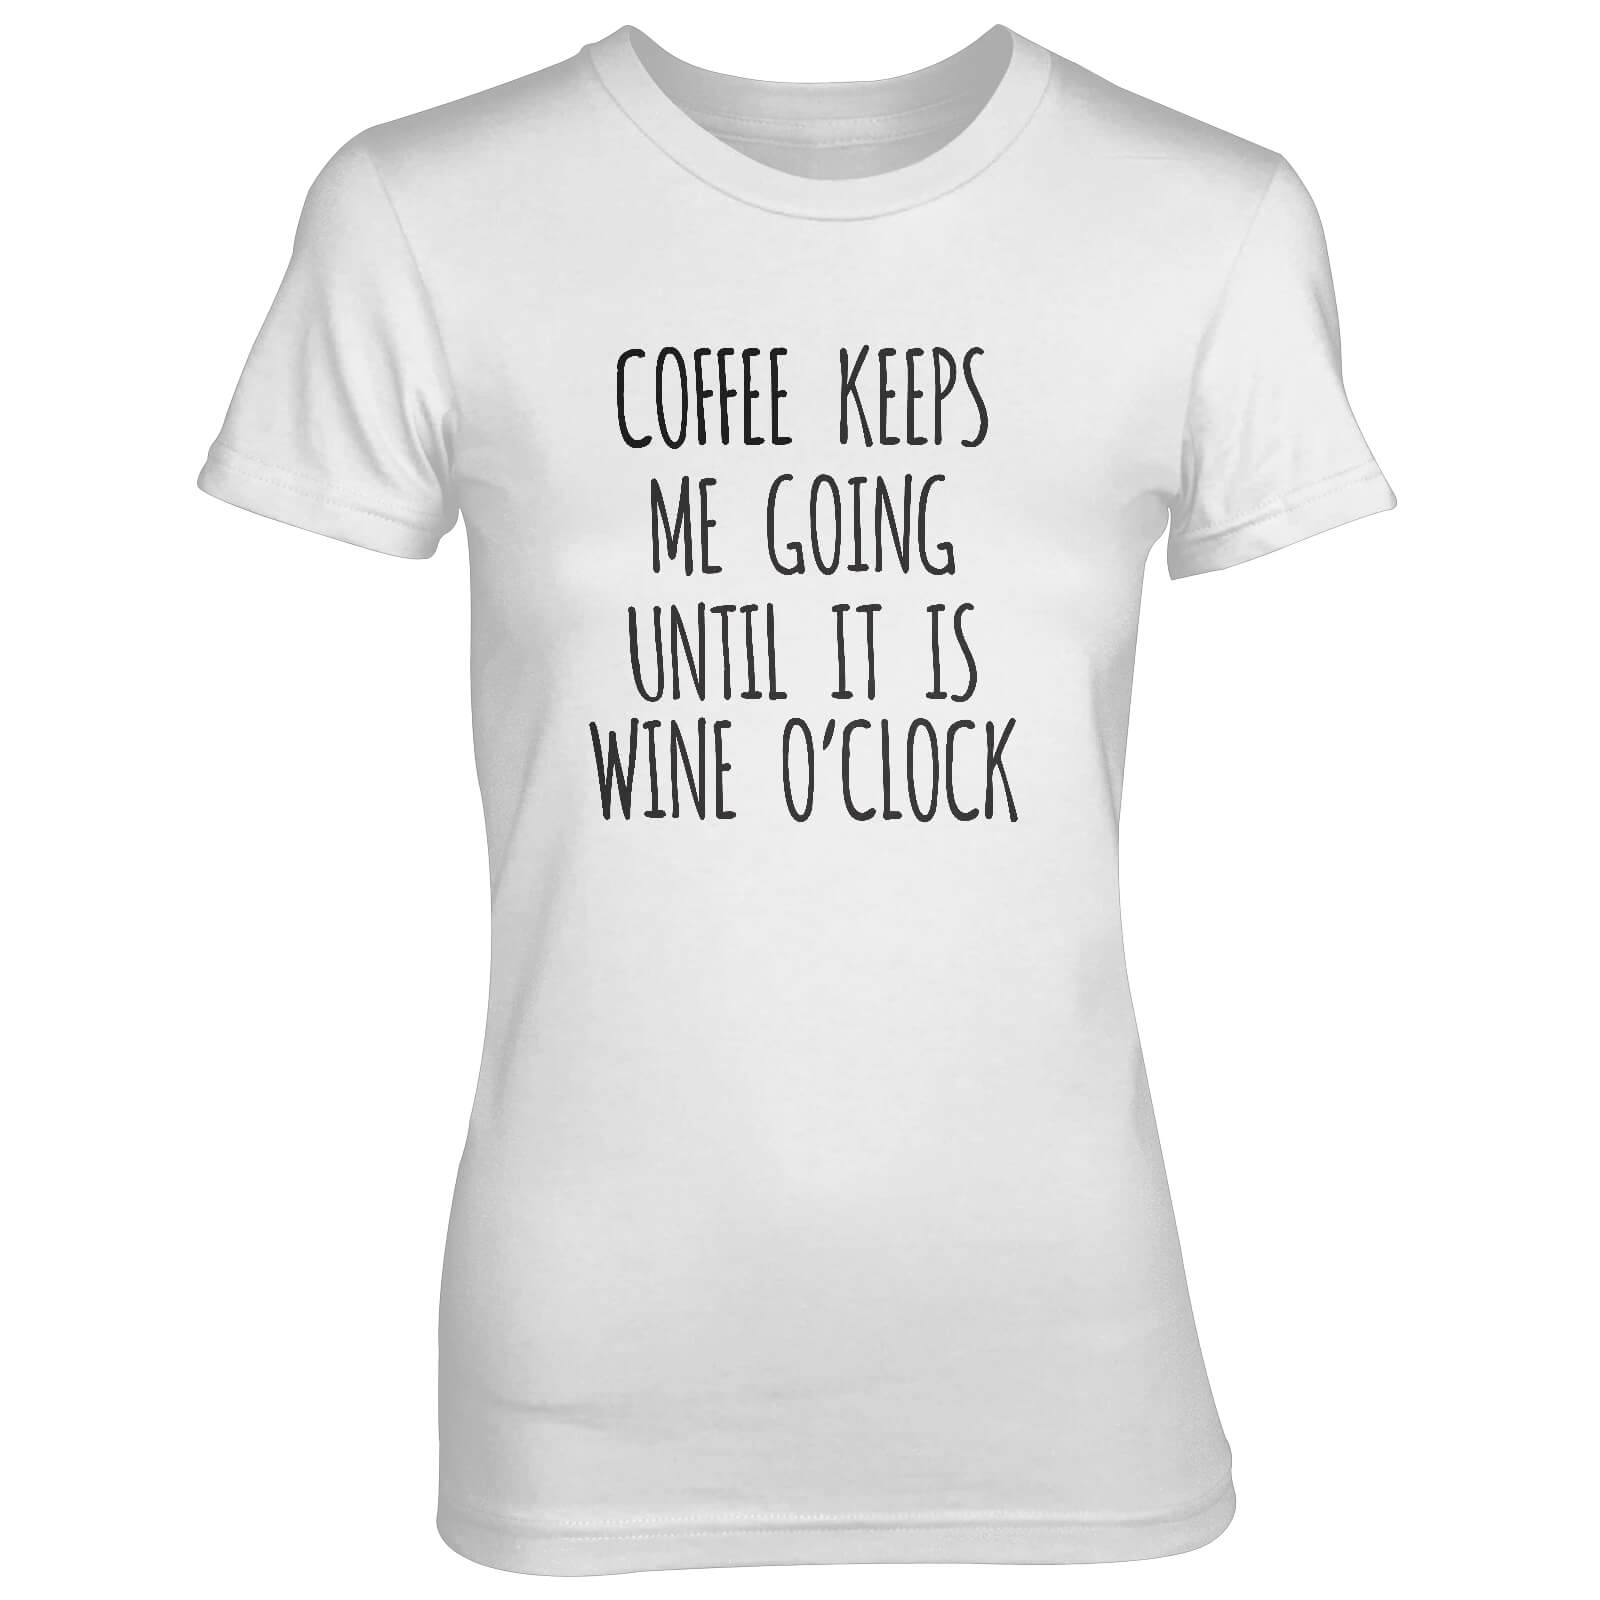 Coffee Keeps Me Going Until It's Wine O'Clock Women's White T-Shirt - S - White